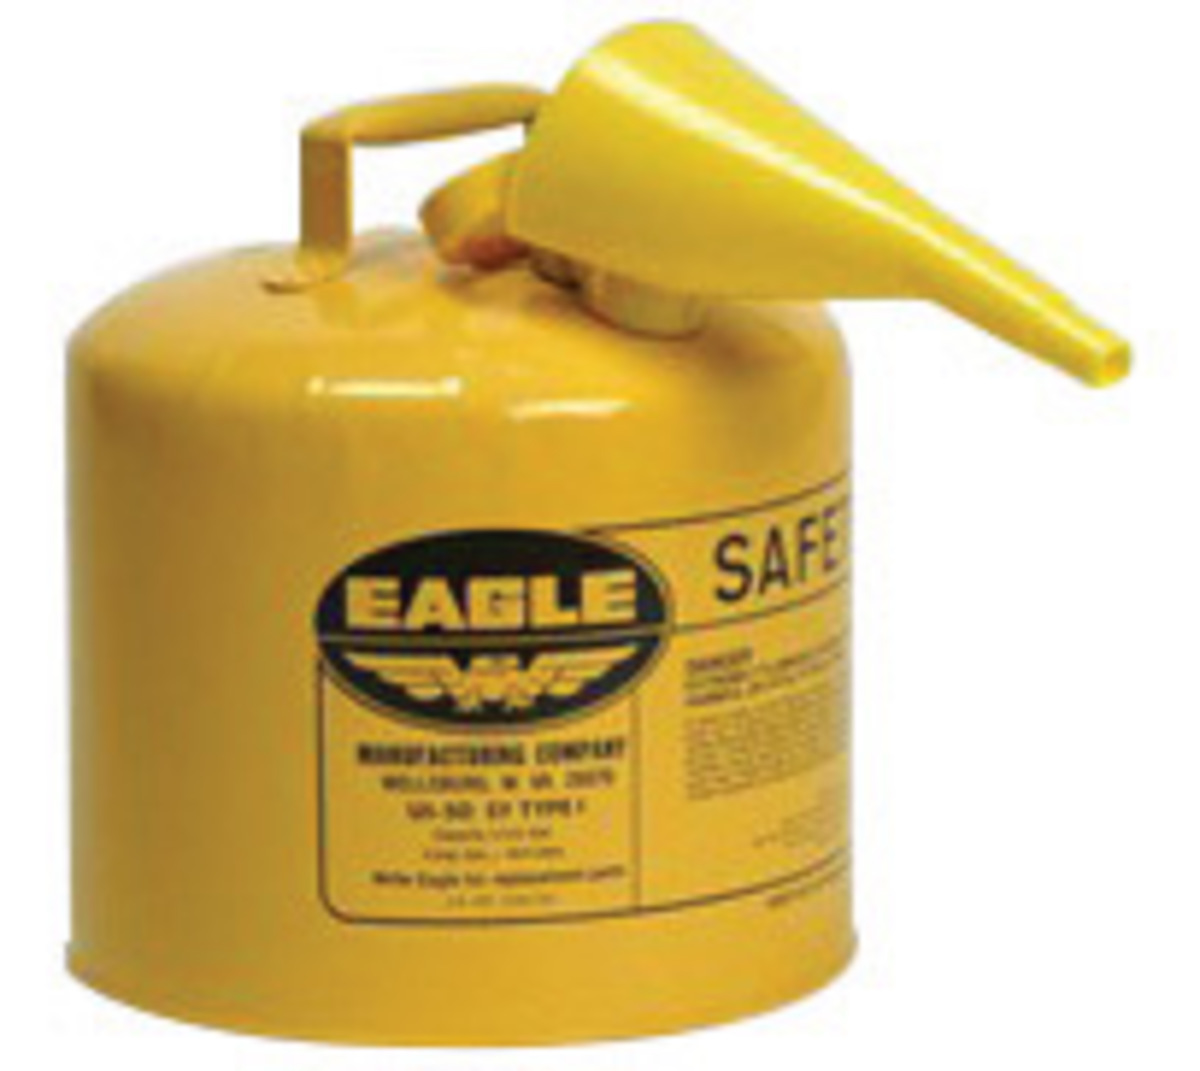 Eagle 5 Gallon Yellow 24 Gauge Galvanized Steel Type I Safety Can With Non-Sparking Flame Arrestor And F-15 Funnel